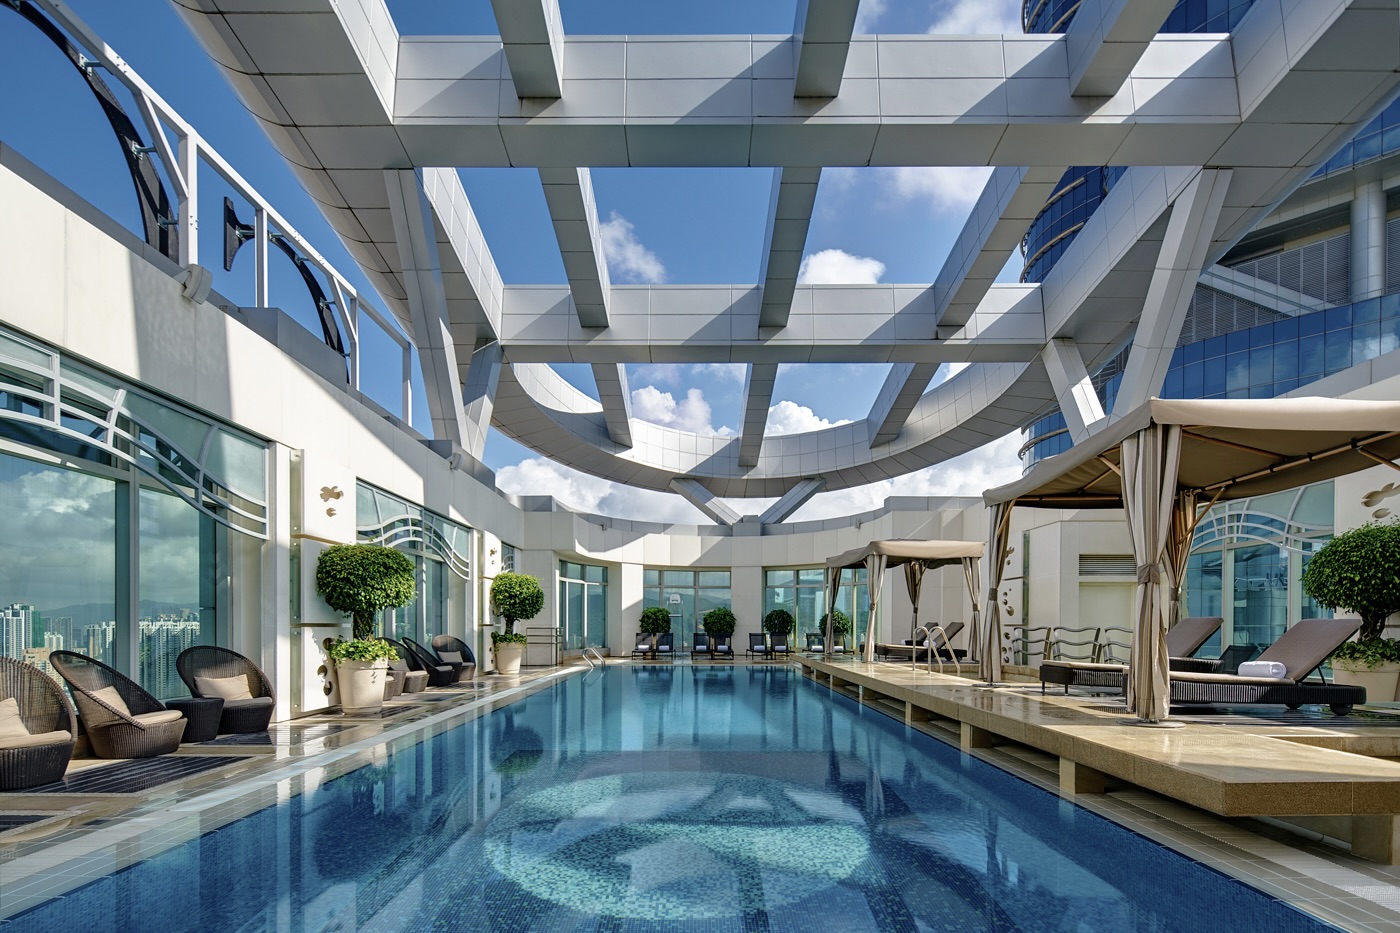 The 20-metre-long indoor swimming pool at the Cordis Hong Kong has deck chairs under cabanas and patio chairs.